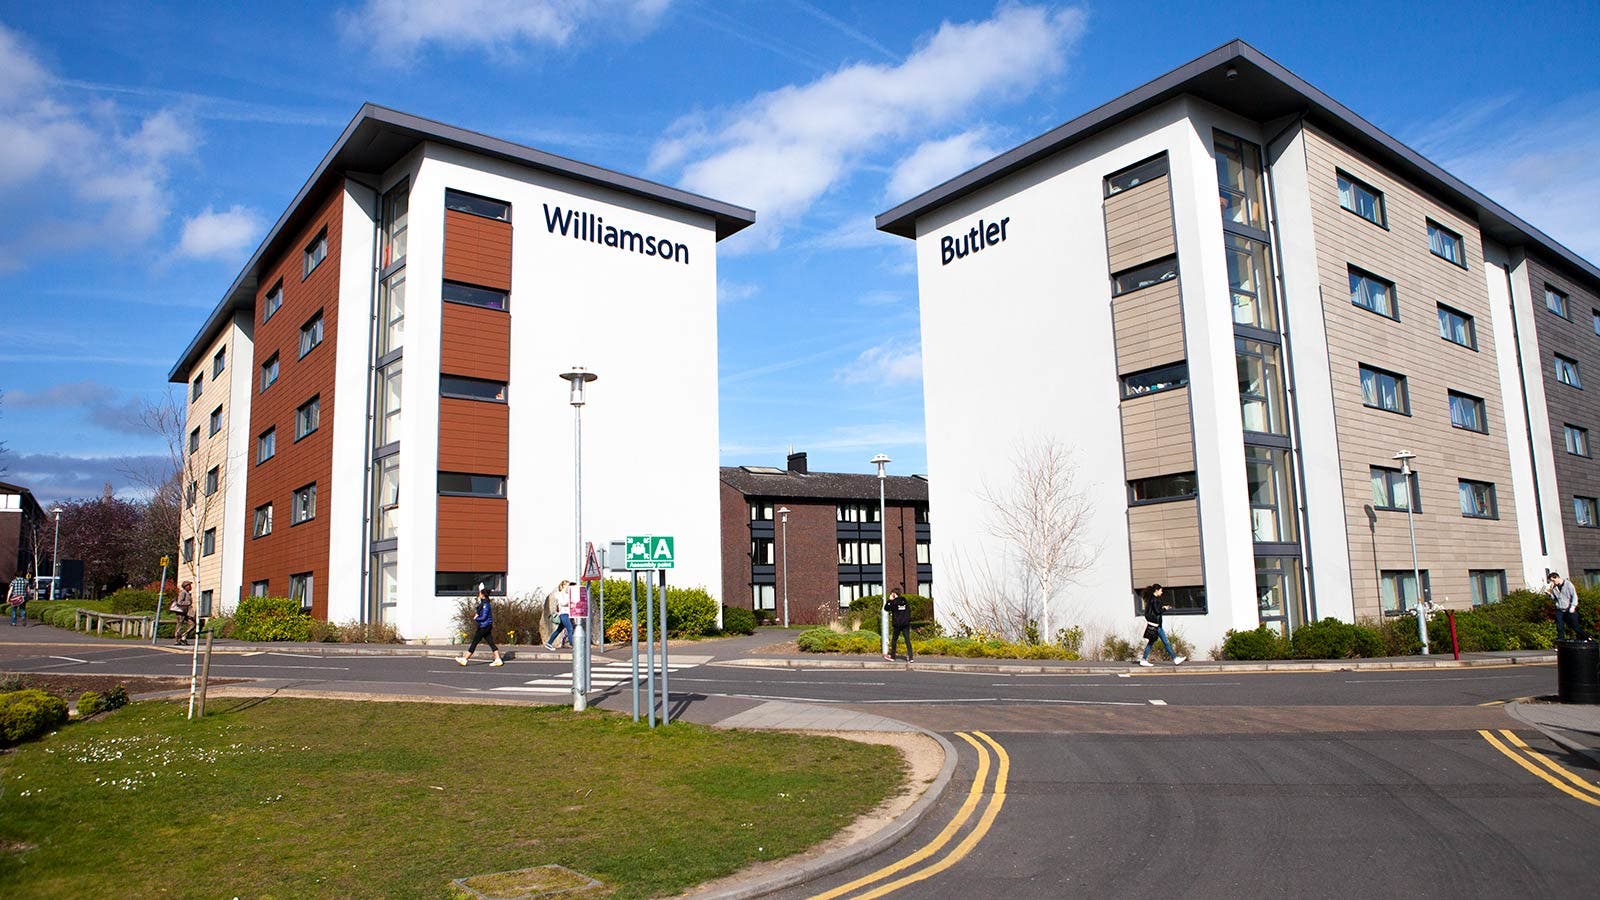 William Butler accommodation building